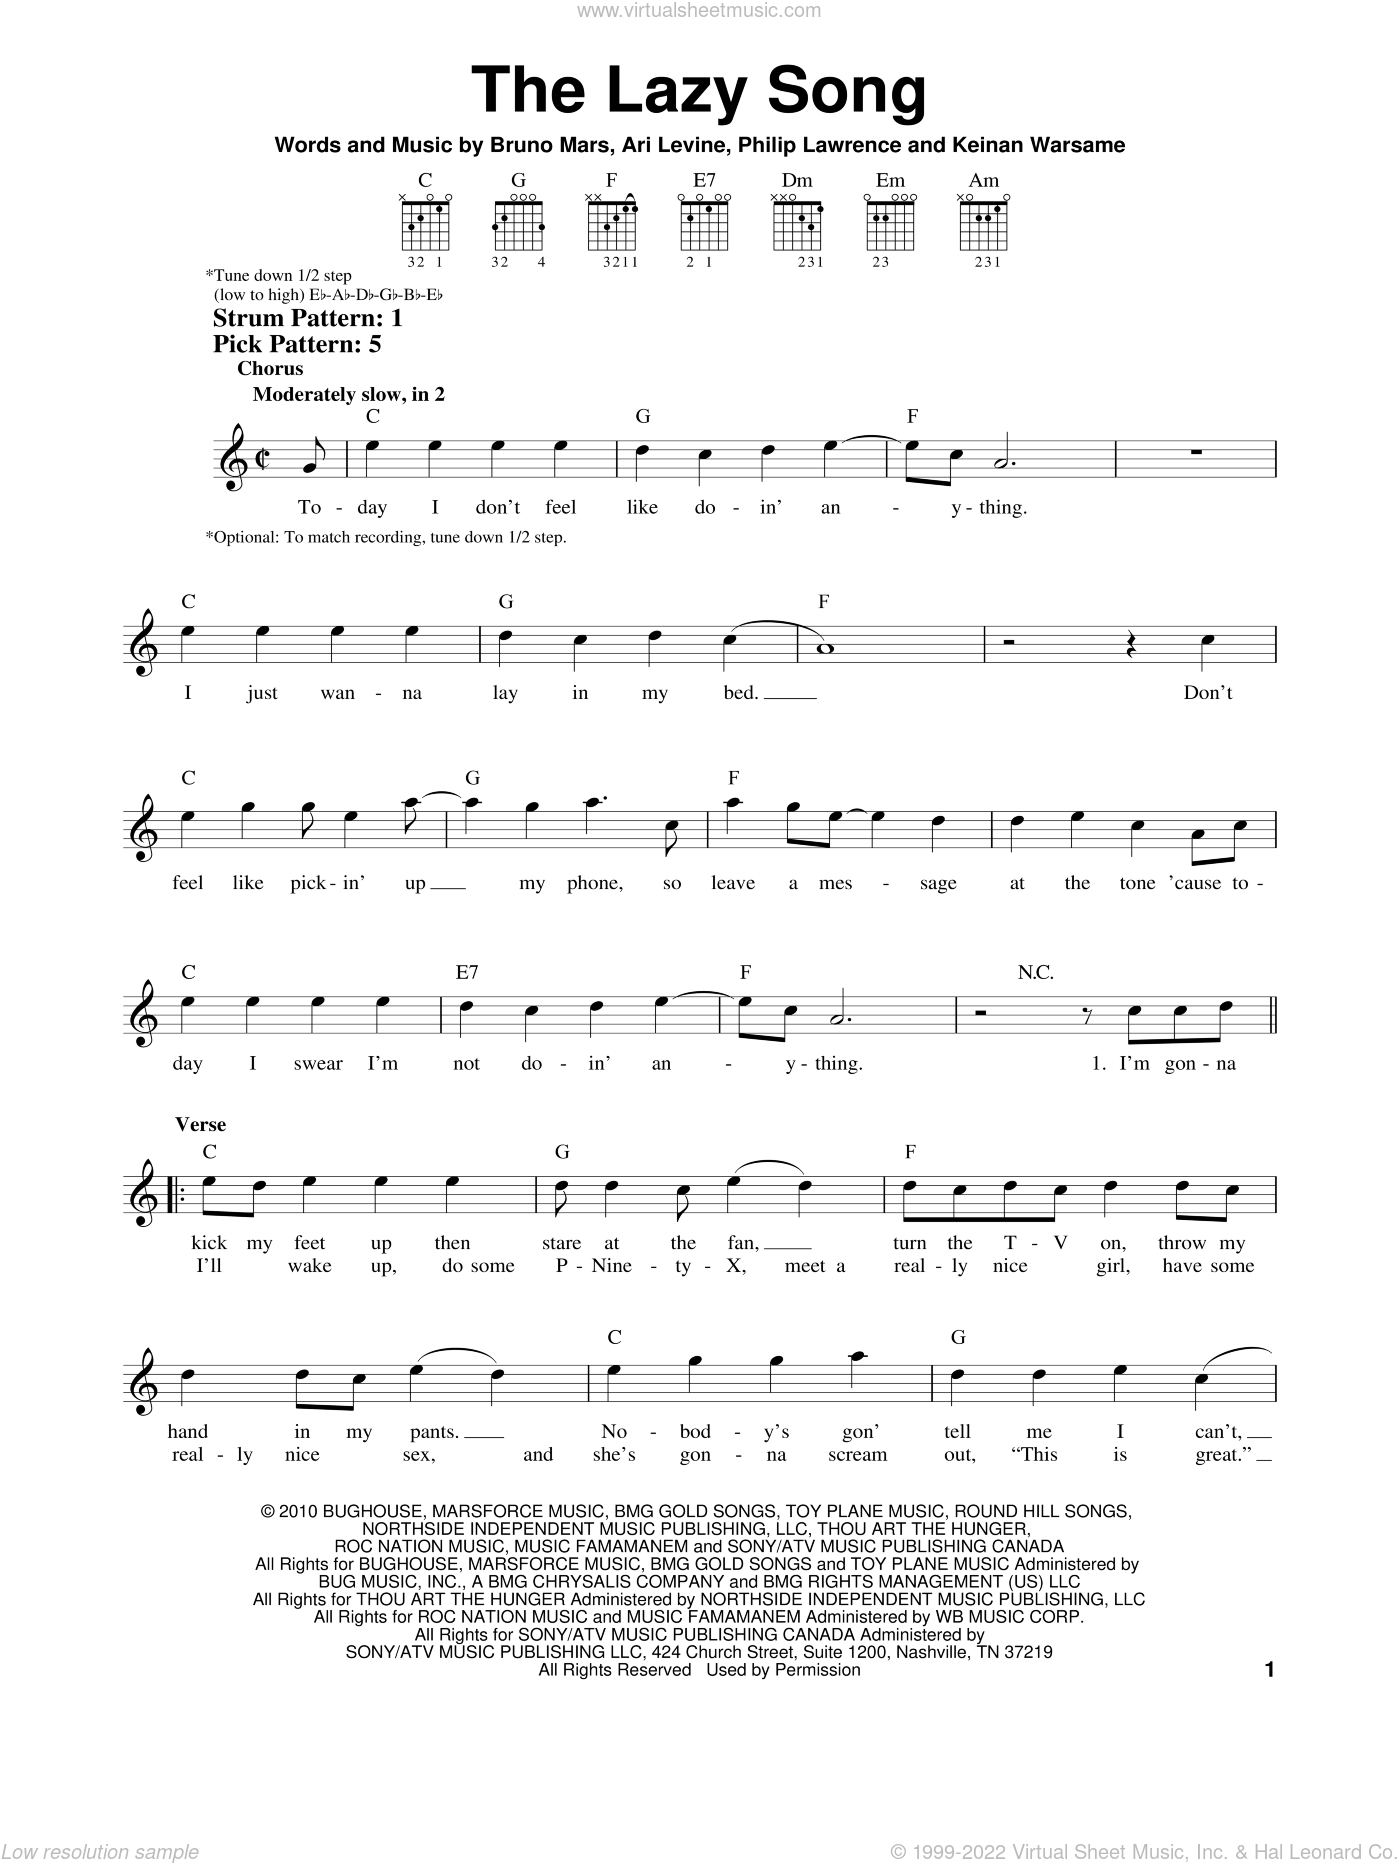 Mars - The Lazy Song sheet music for guitar solo (chords) v2